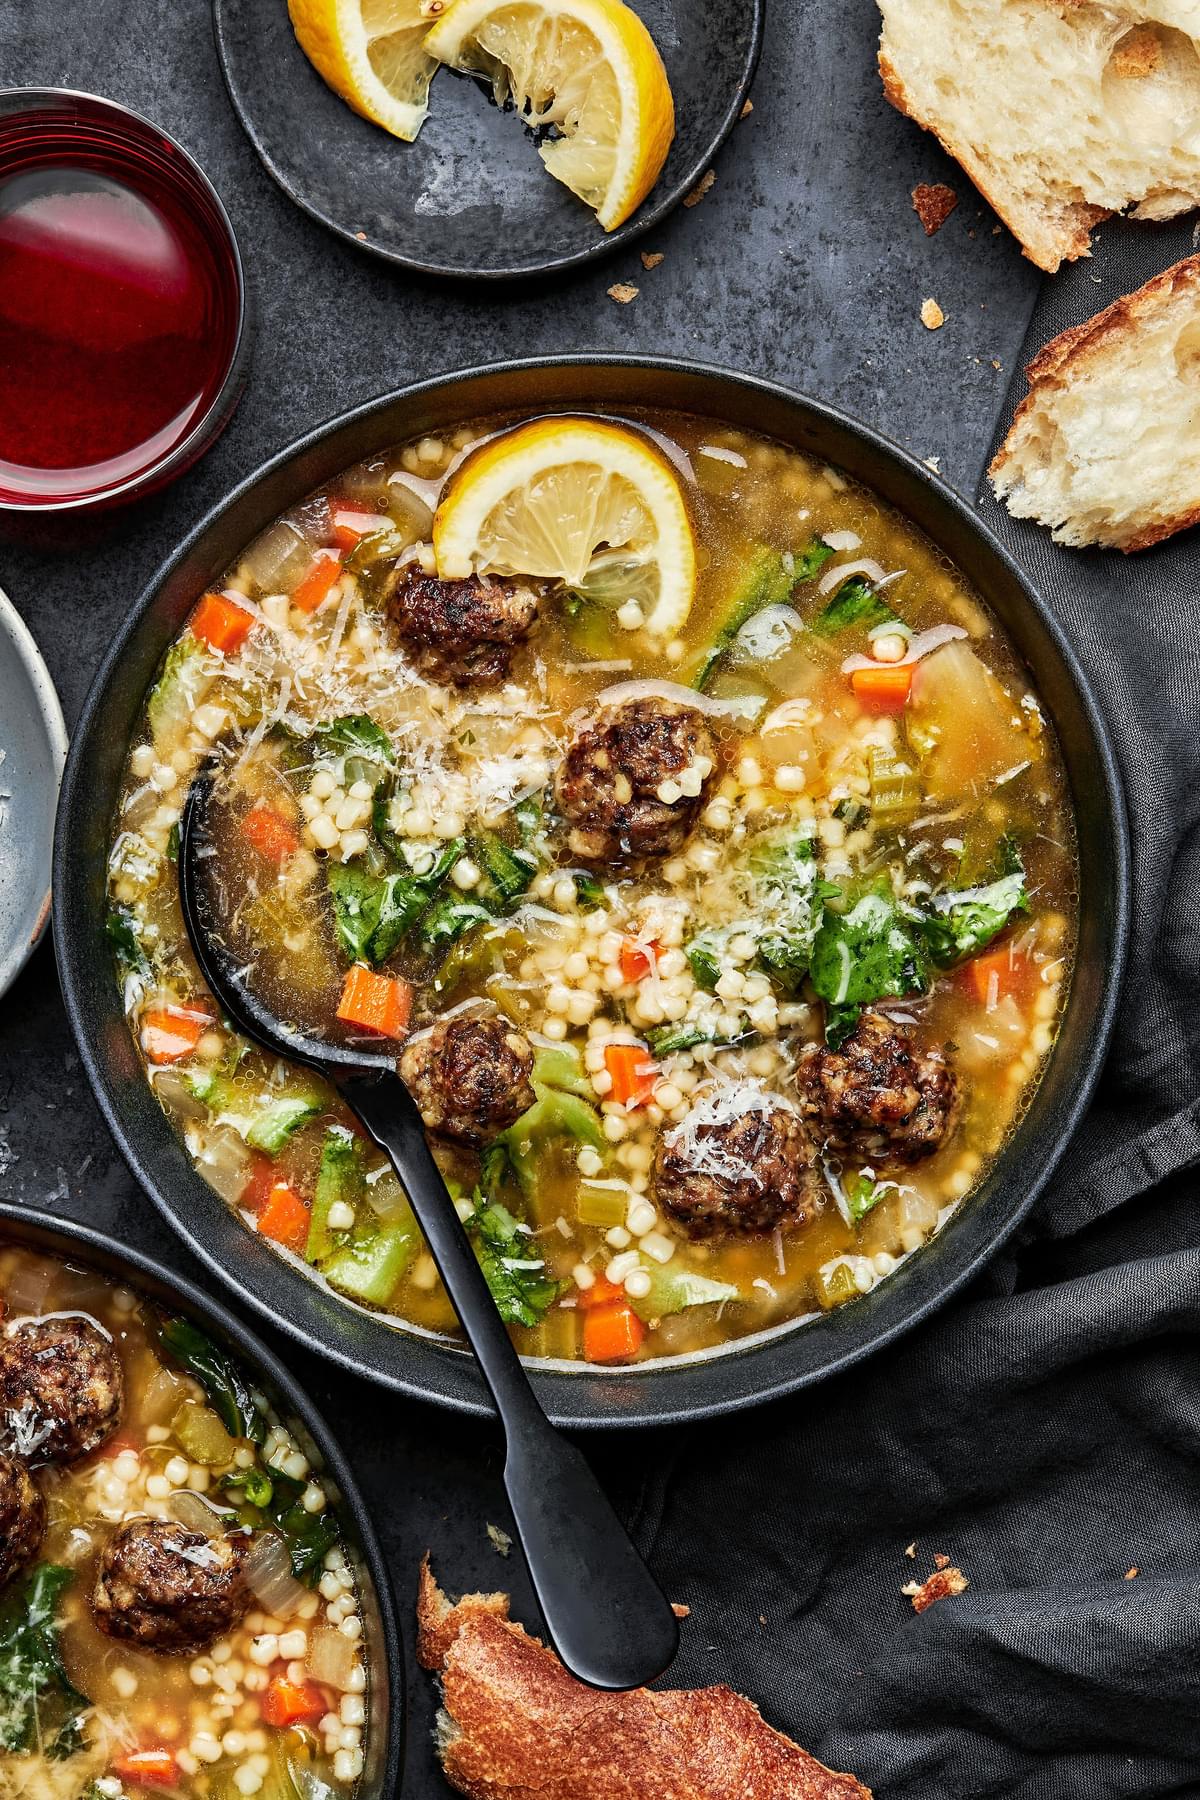 italian wedding soup in a bowl with a spoon toped with parsley and a lemon wedge